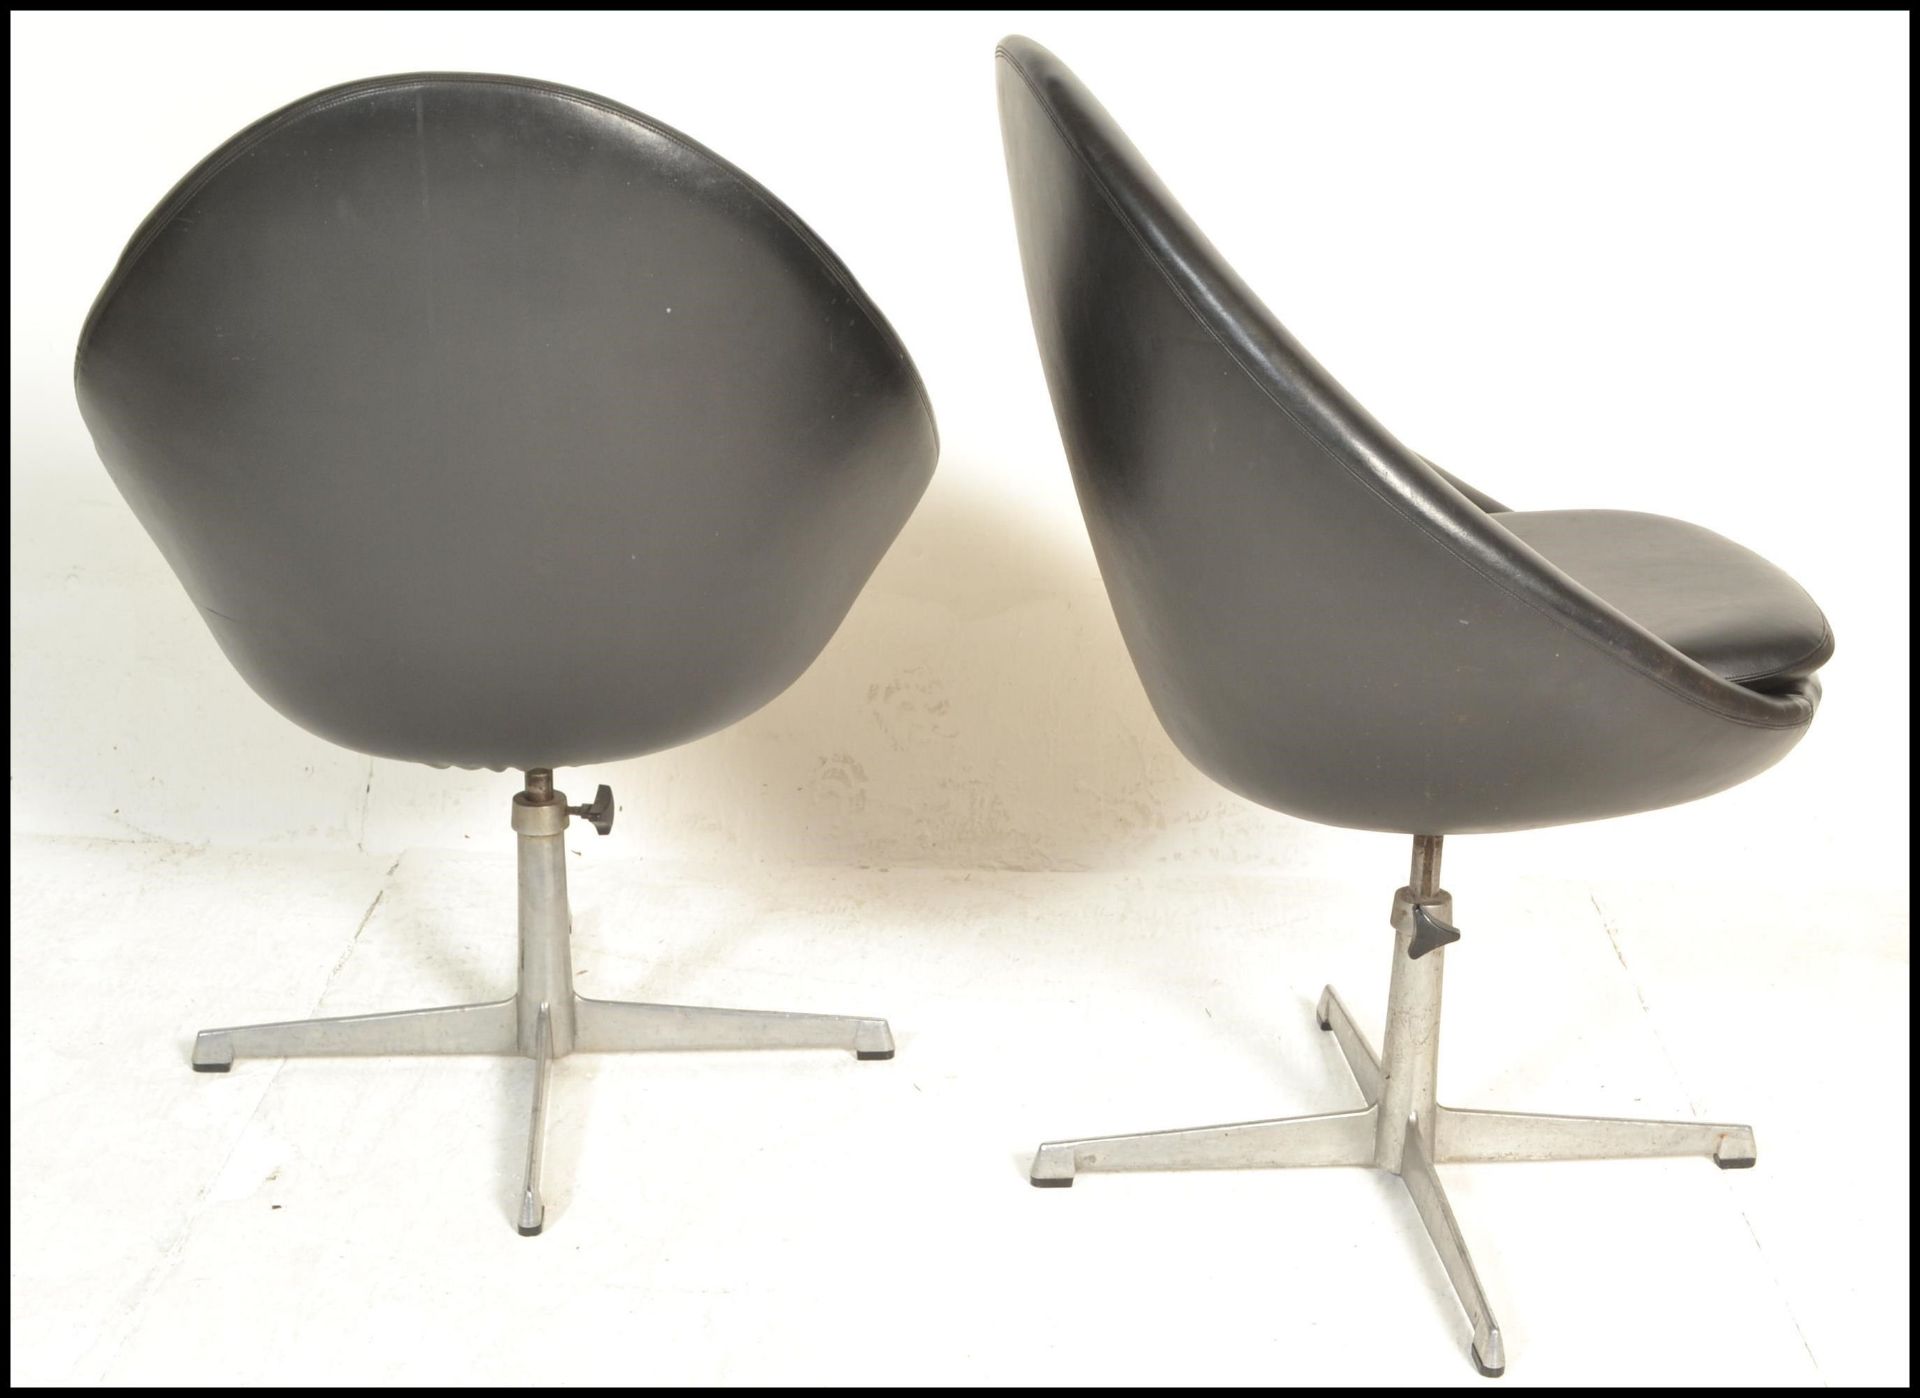 A pair of contemporary retro style swivel tub chairs, upholstered in a black leatherette material - Image 3 of 4